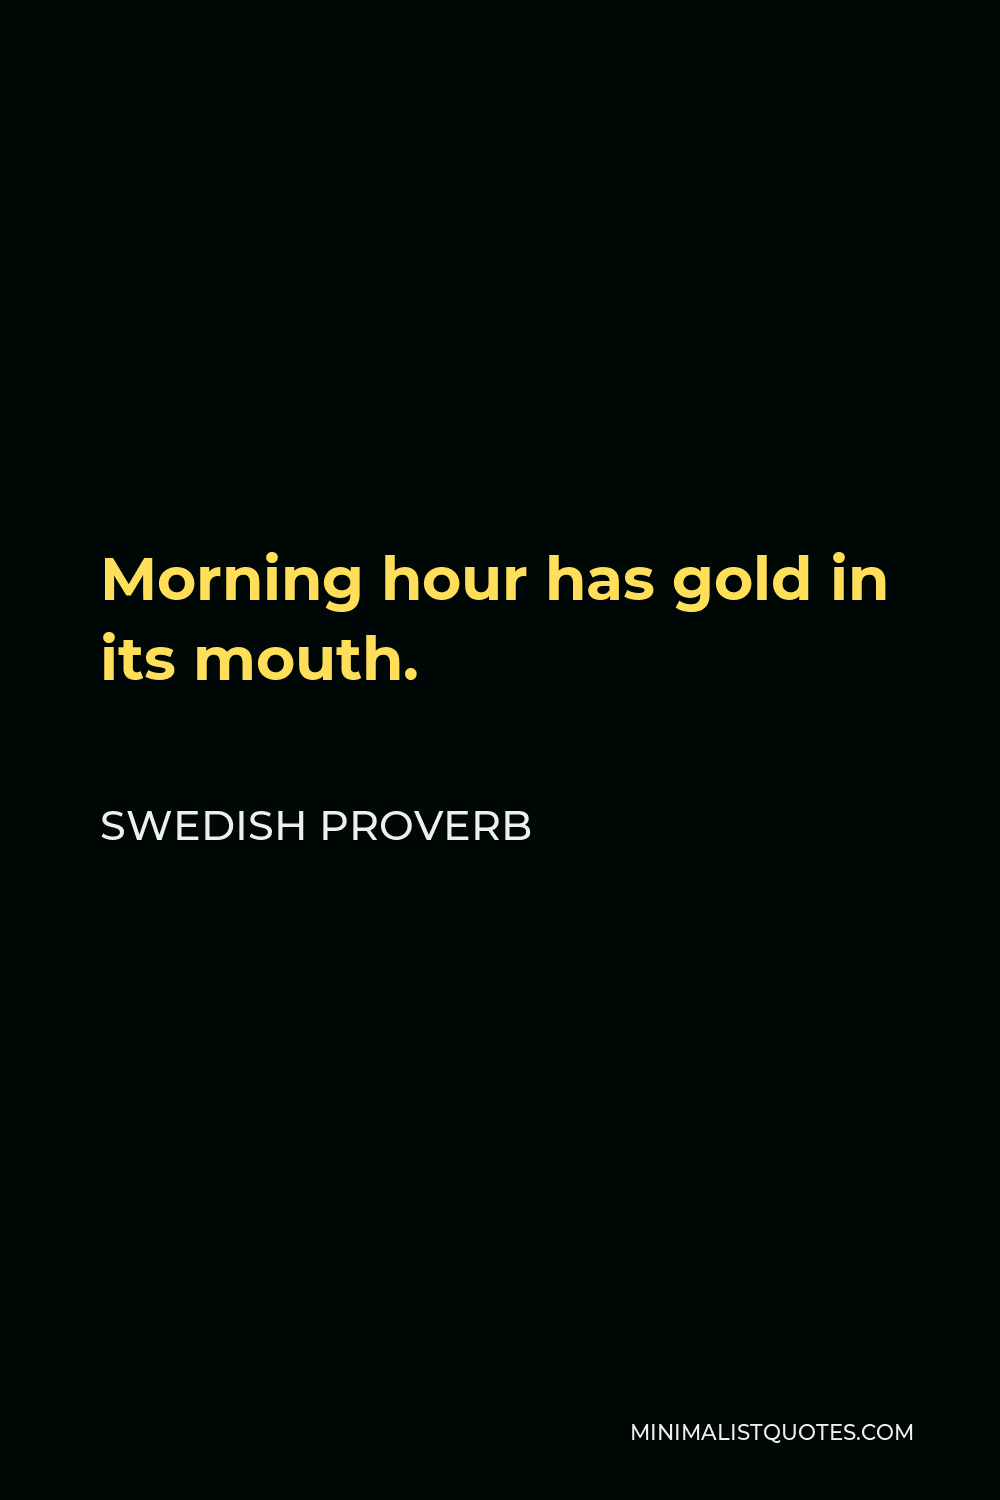 Swedish Proverb Quote - Morning hour has gold in its mouth.